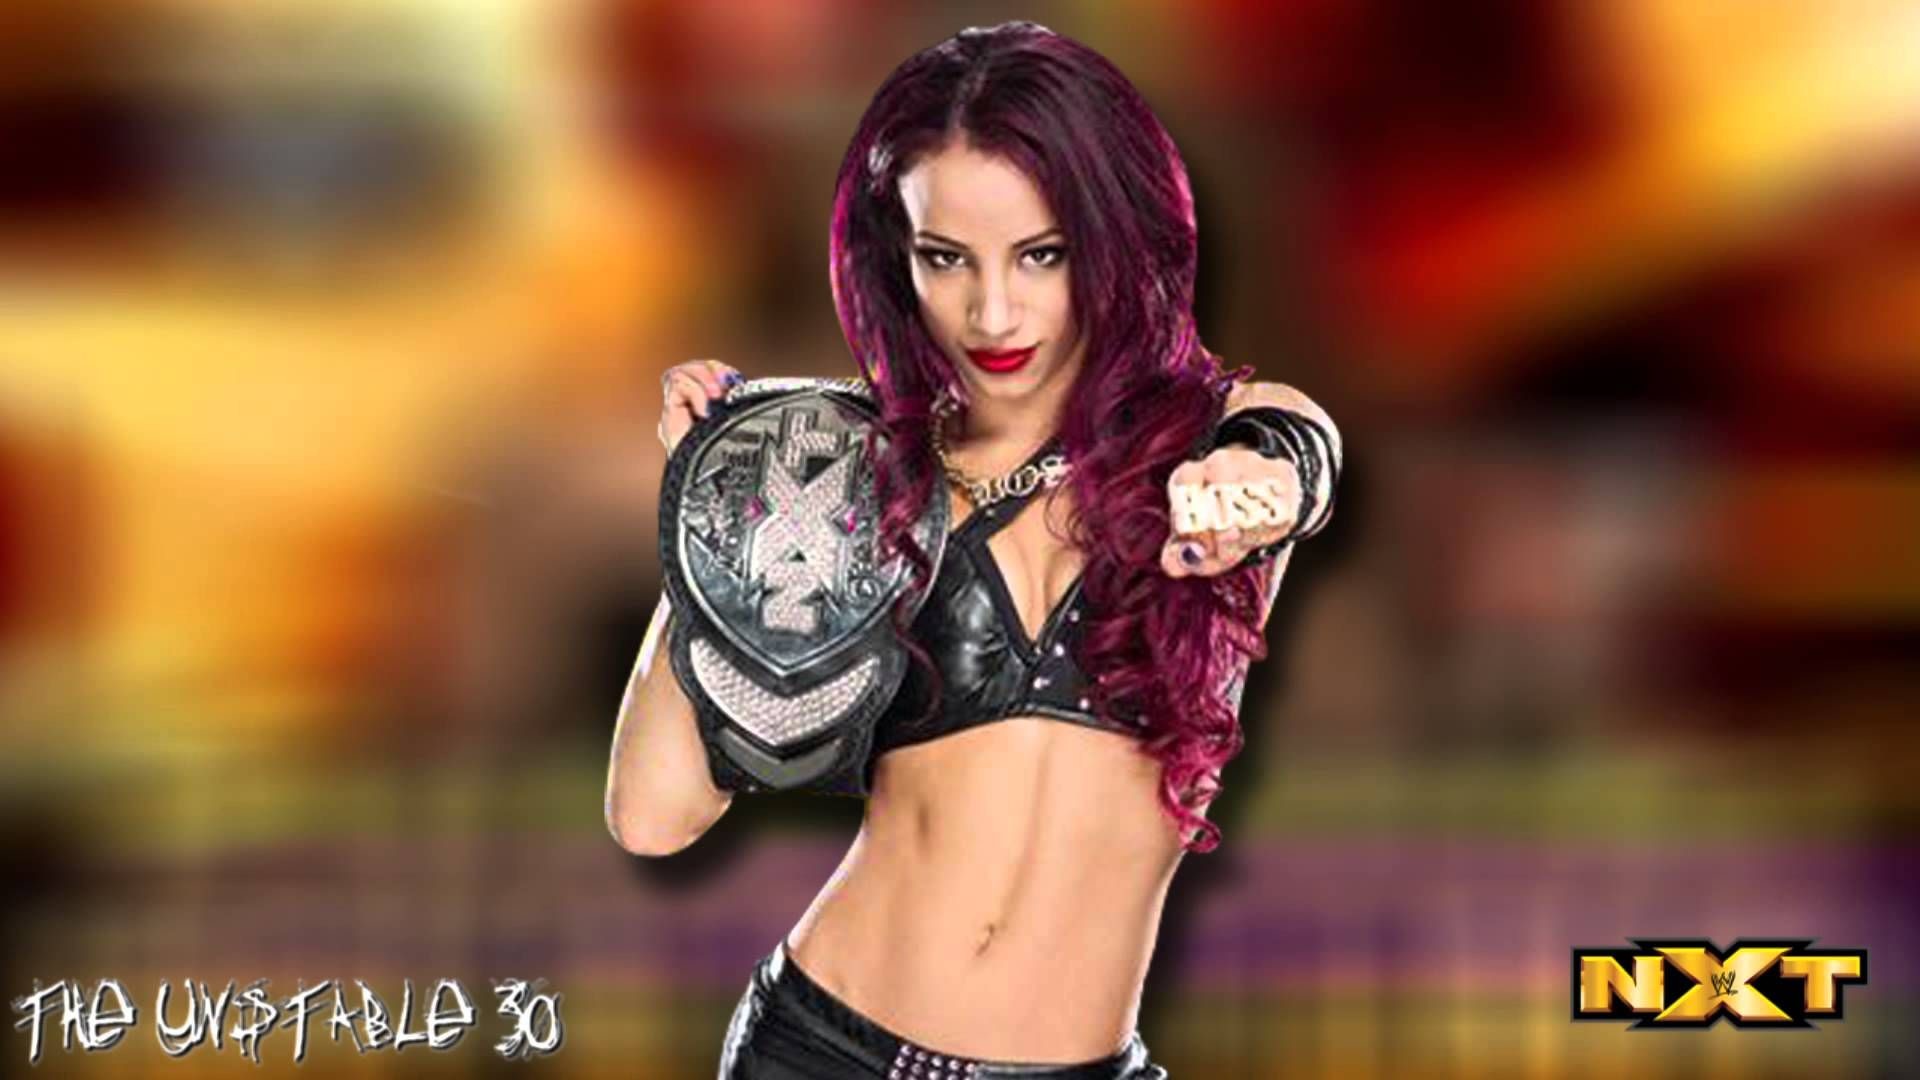 Download wallpapers Sasha Banks 4k american wrestlers WWE wrestling  neon lights Mercedes KaestnerVarnado female wrestlers Sasha Banks 4K  wrestlers for desktop with resolution 3840x2400 High Quality HD pictures  wallpapers